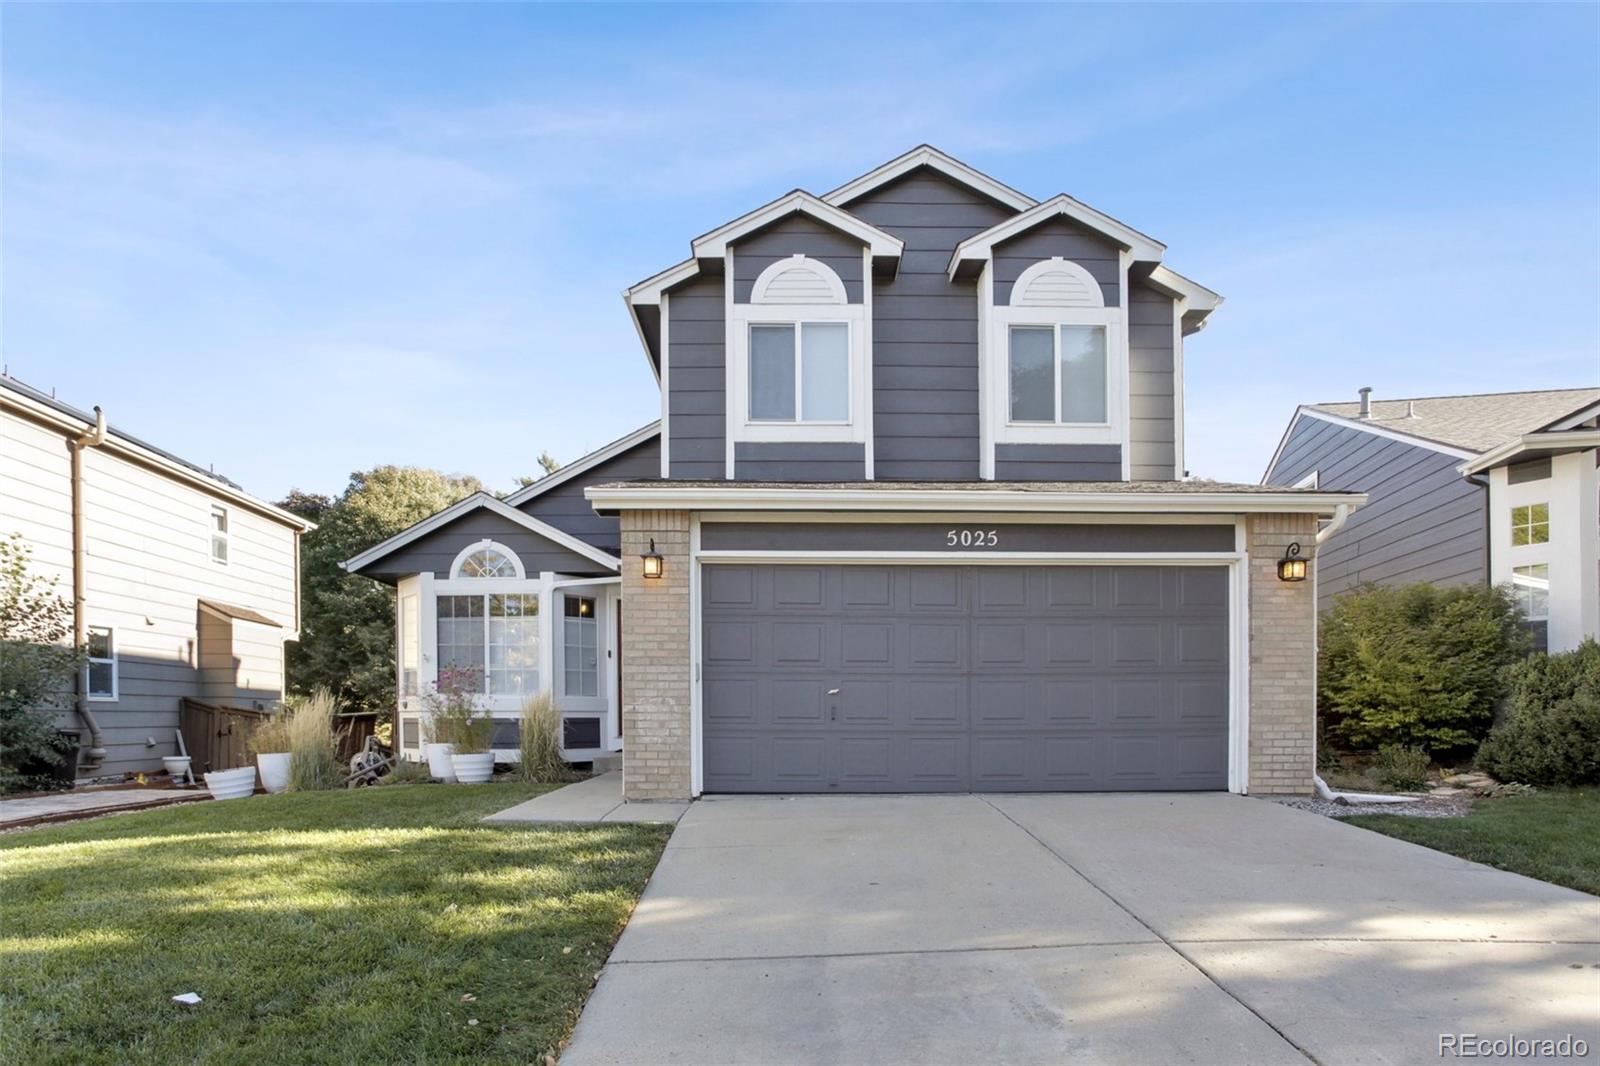 Report Image for 5025  Weeping Willow Circle,Highlands Ranch, Colorado